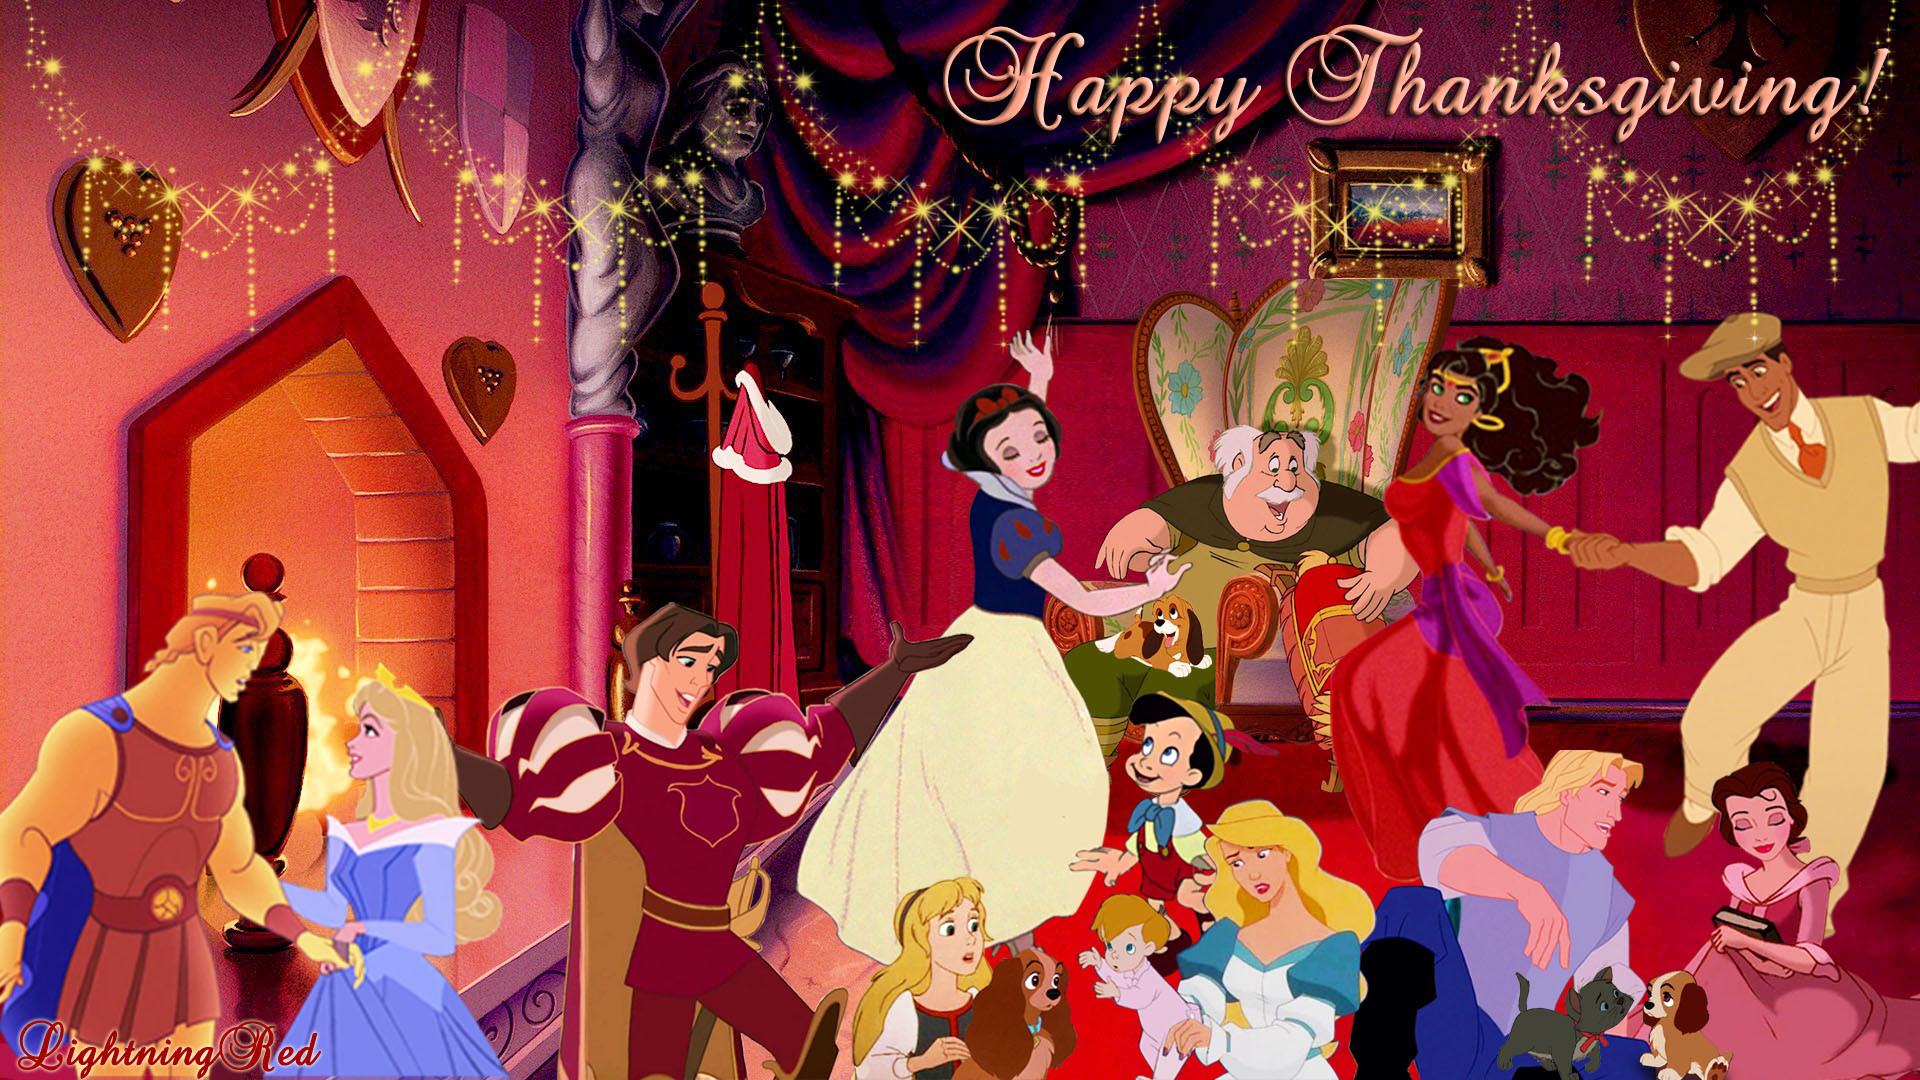 Thanksgiving Quotes Disney
 Download Disney Thanksgiving Wallpaper Backgrounds Gallery